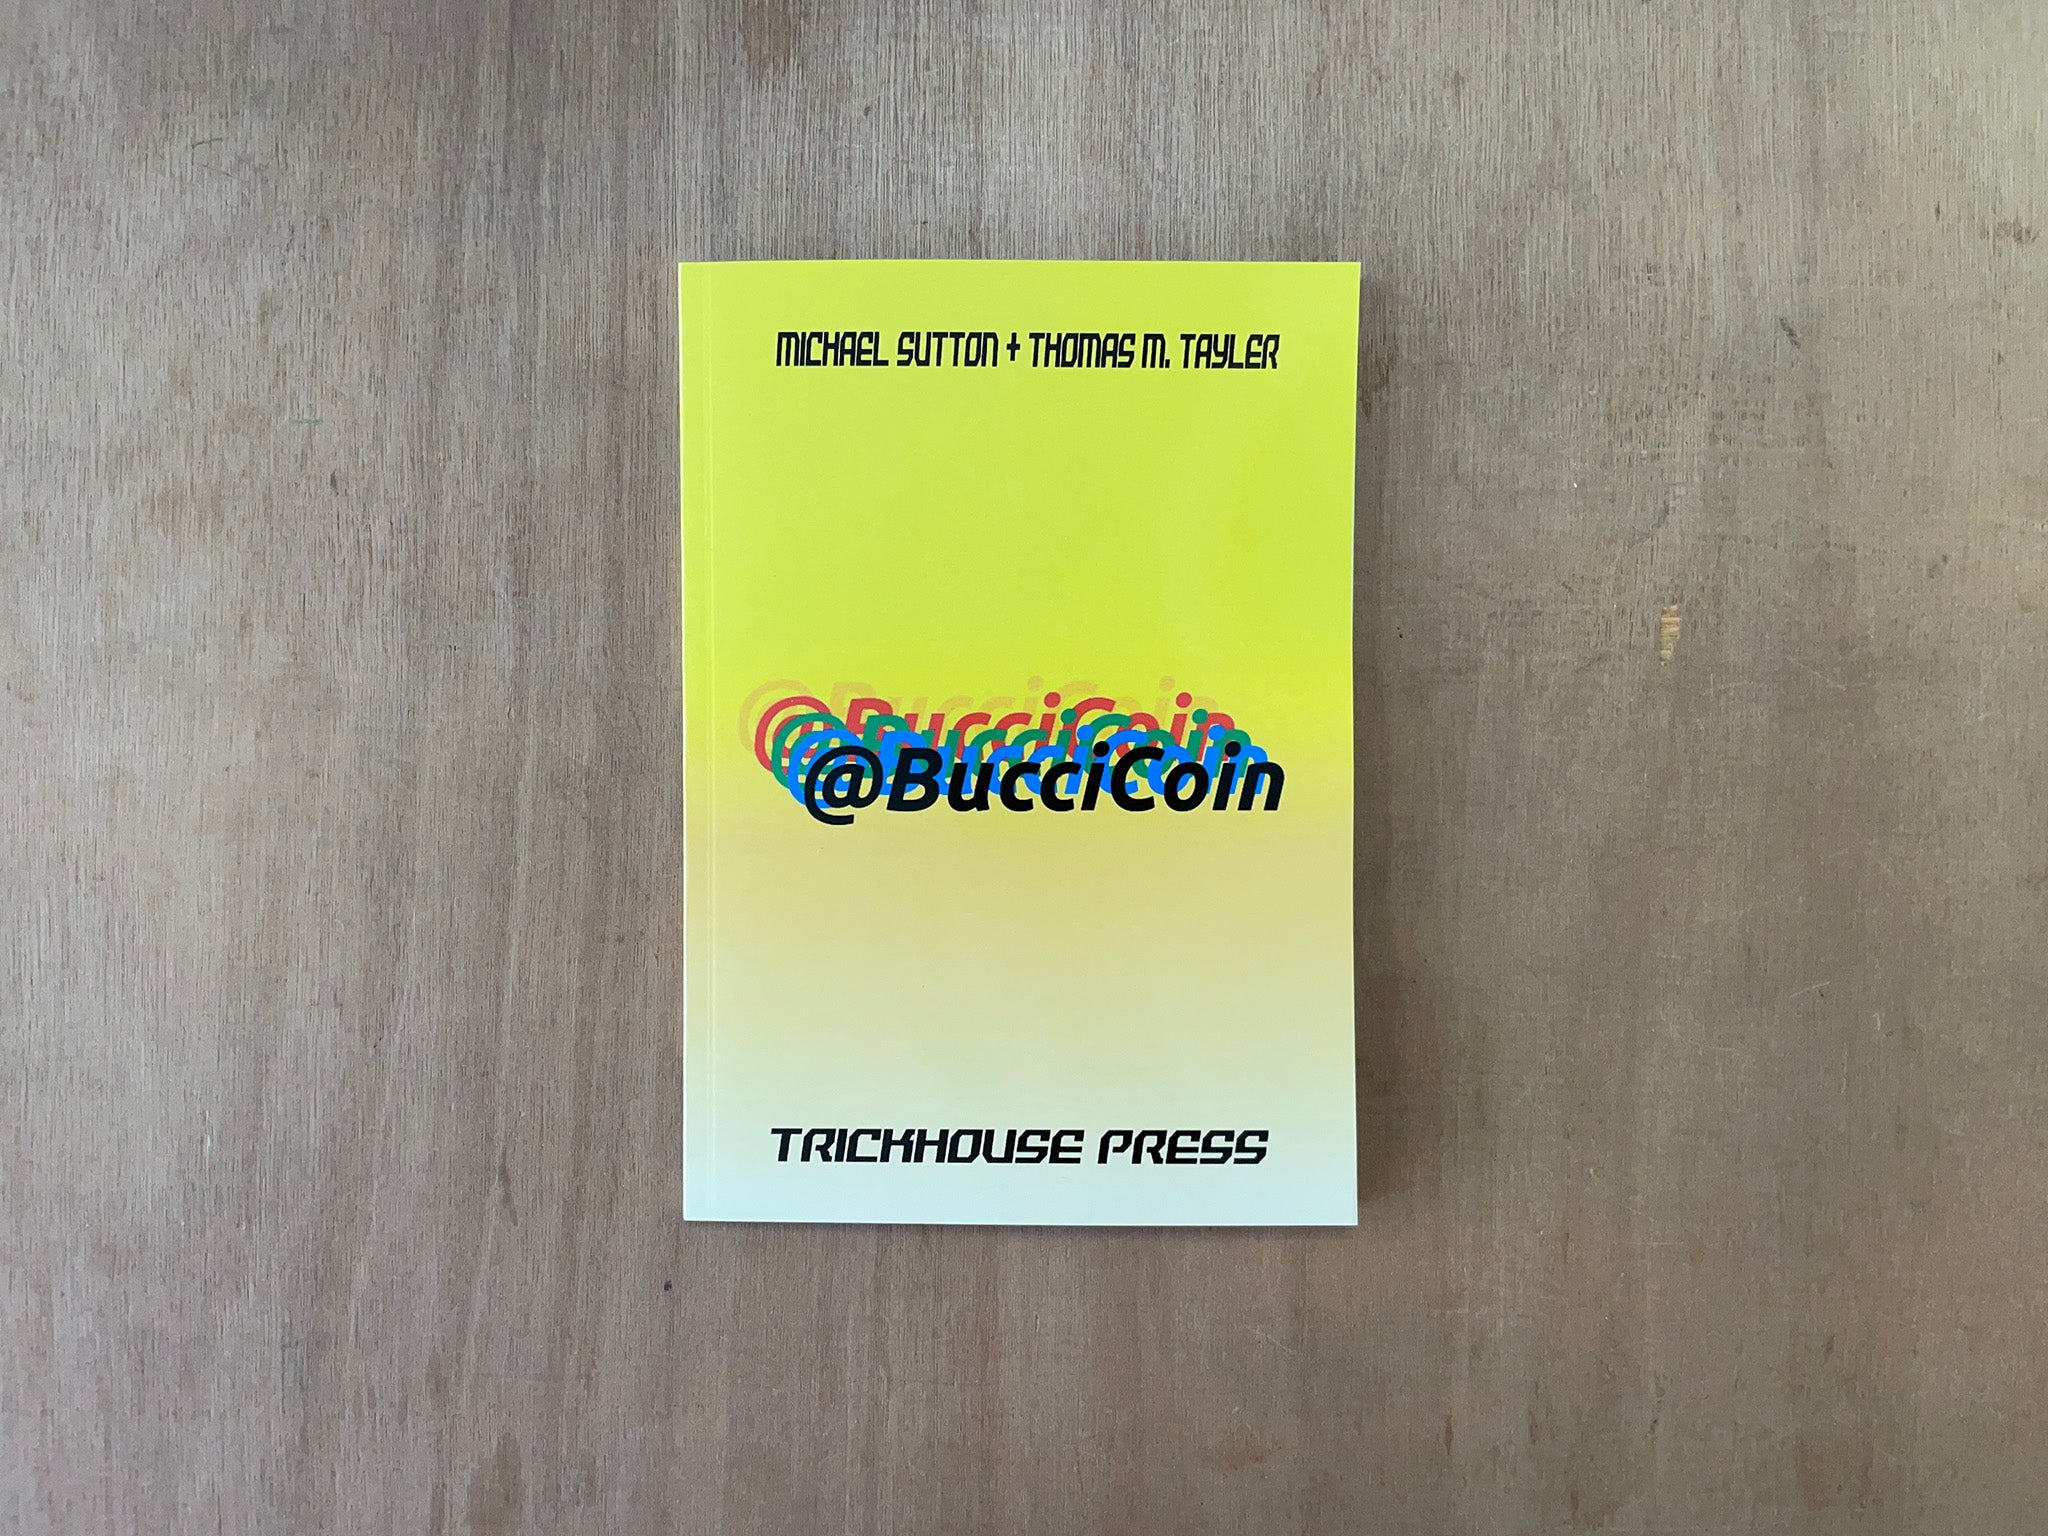 @BUCCICOIN by Michael Sutton and Thomas M. Tayler